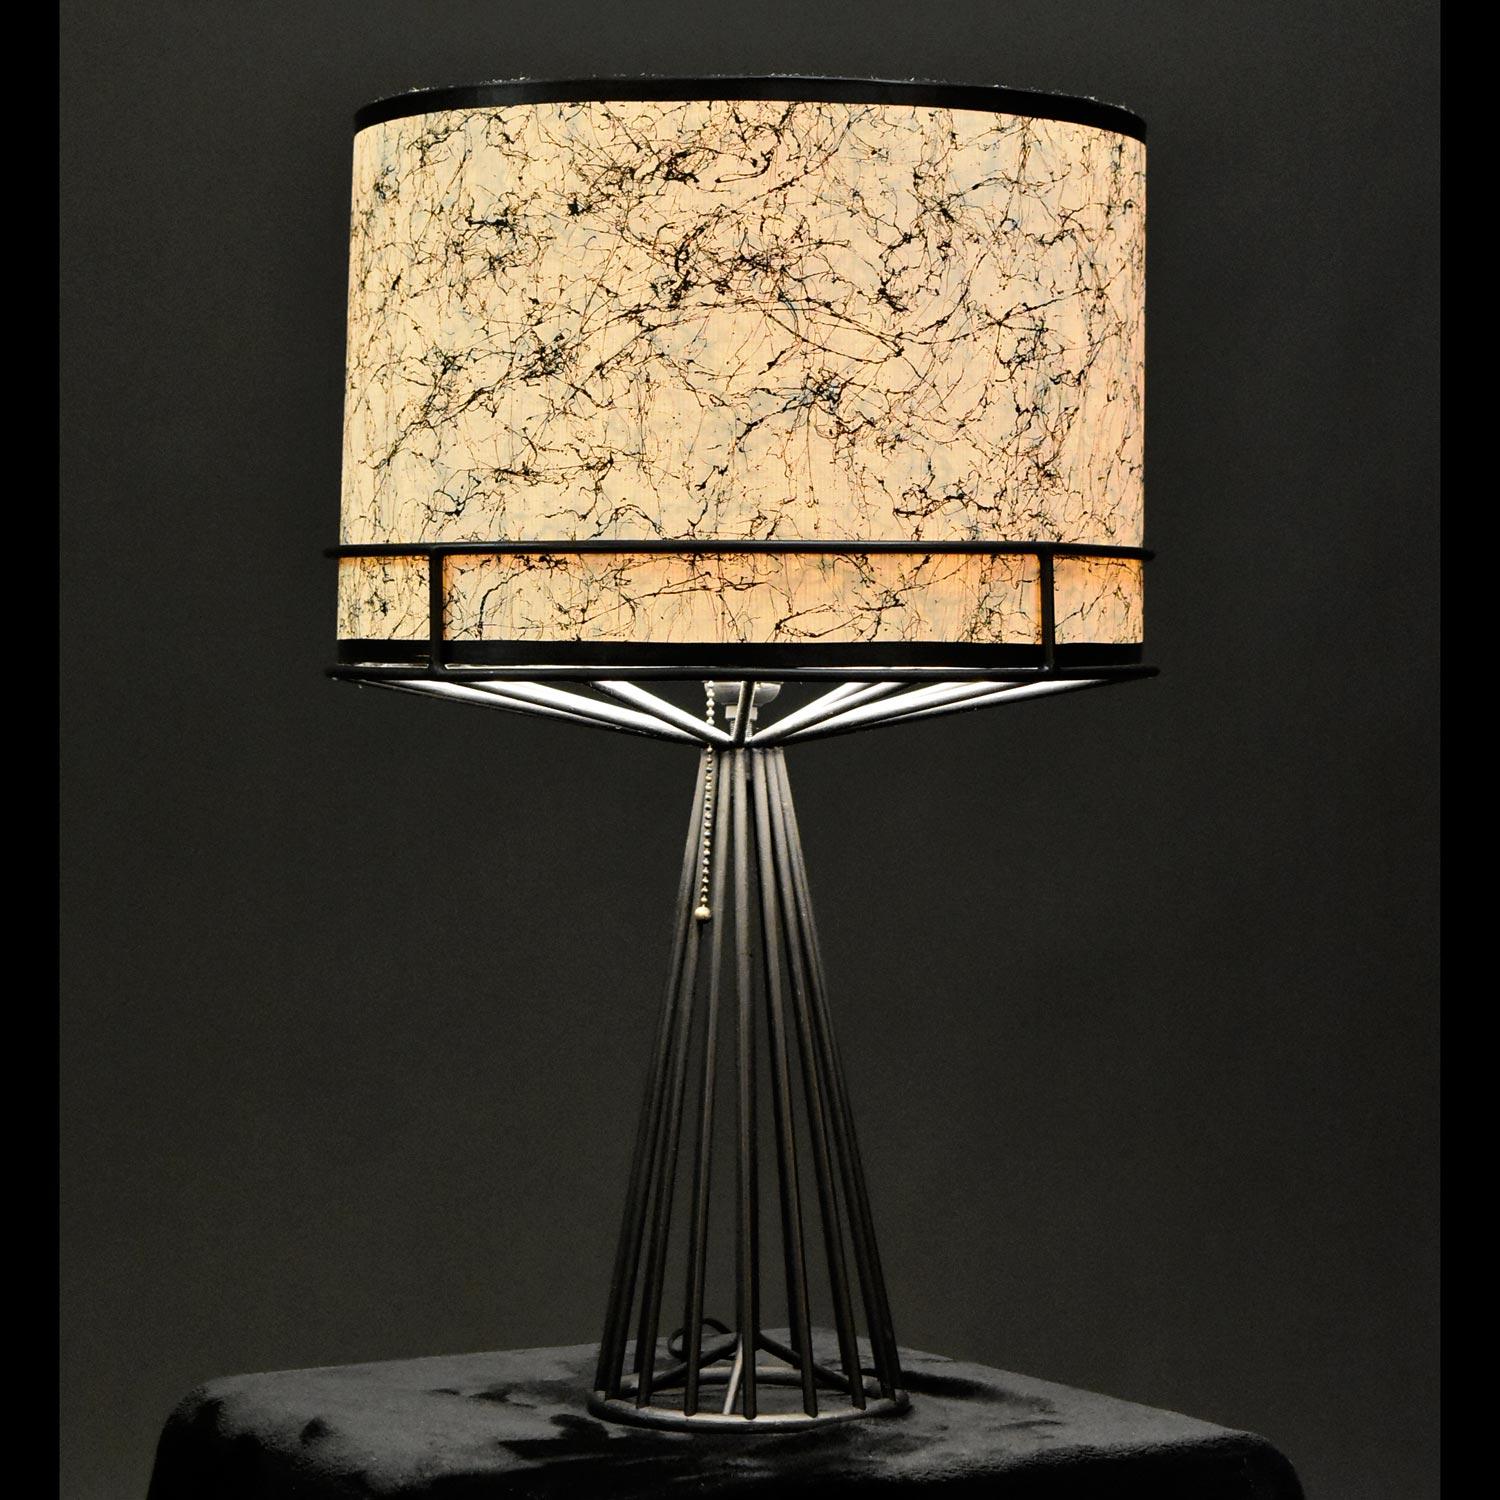 With a magic wand, we couldn't create a more perfect drum shade to compliment this lamp. Similar in style to the works of Warren Platner, architectural spires of metal wire reach upward to shape an obelisk cone. From its neck, more spires